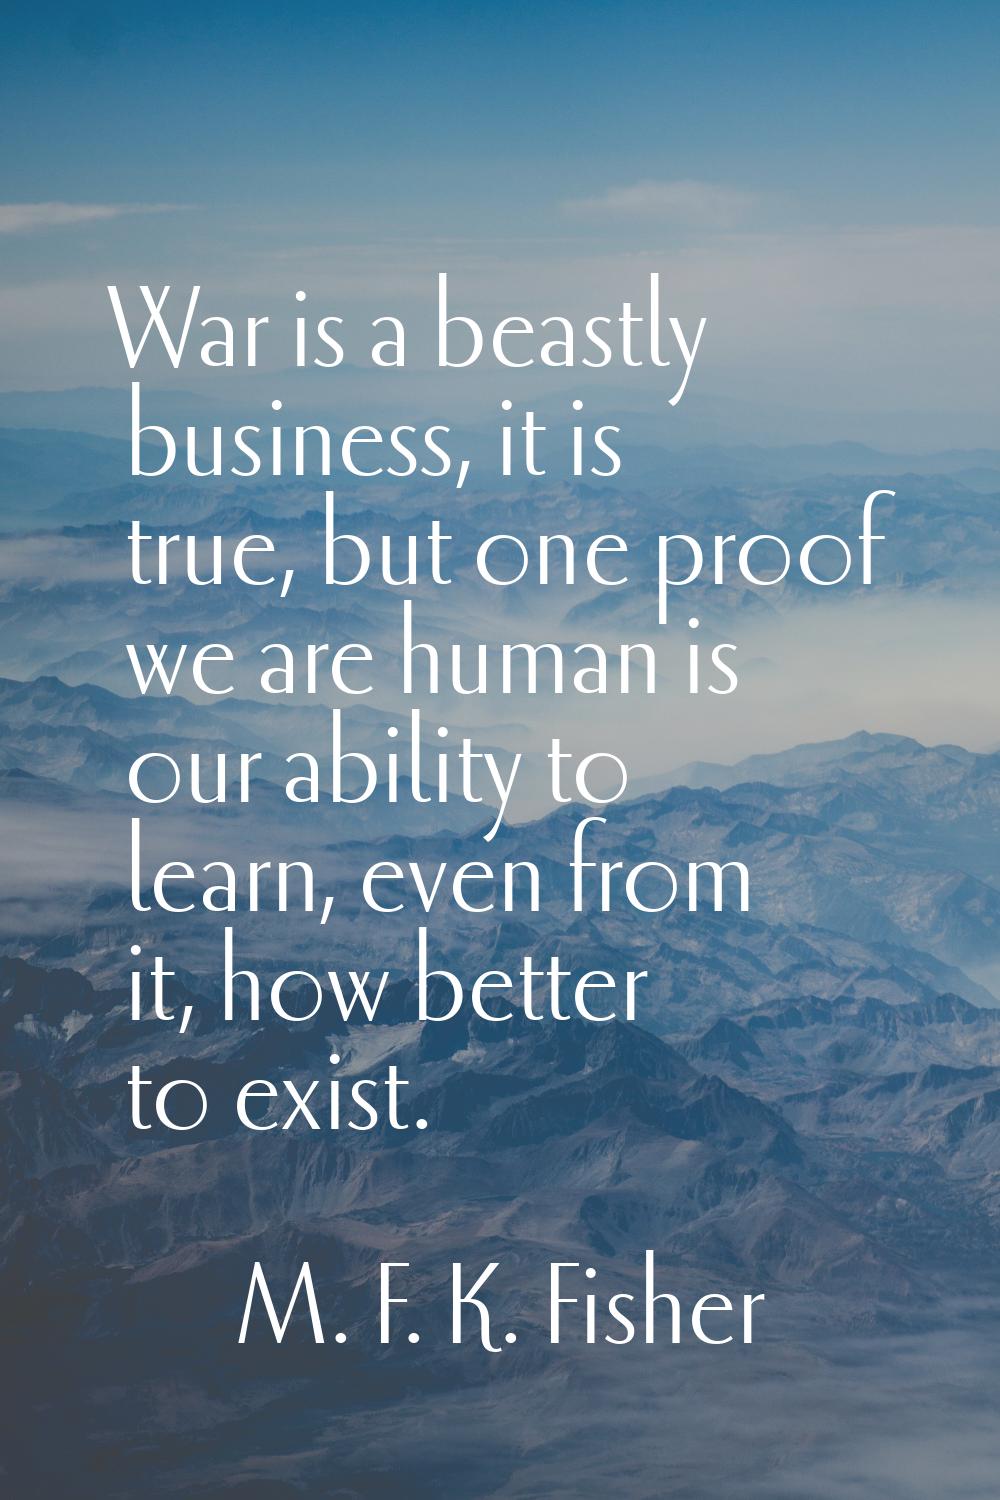 War is a beastly business, it is true, but one proof we are human is our ability to learn, even fro